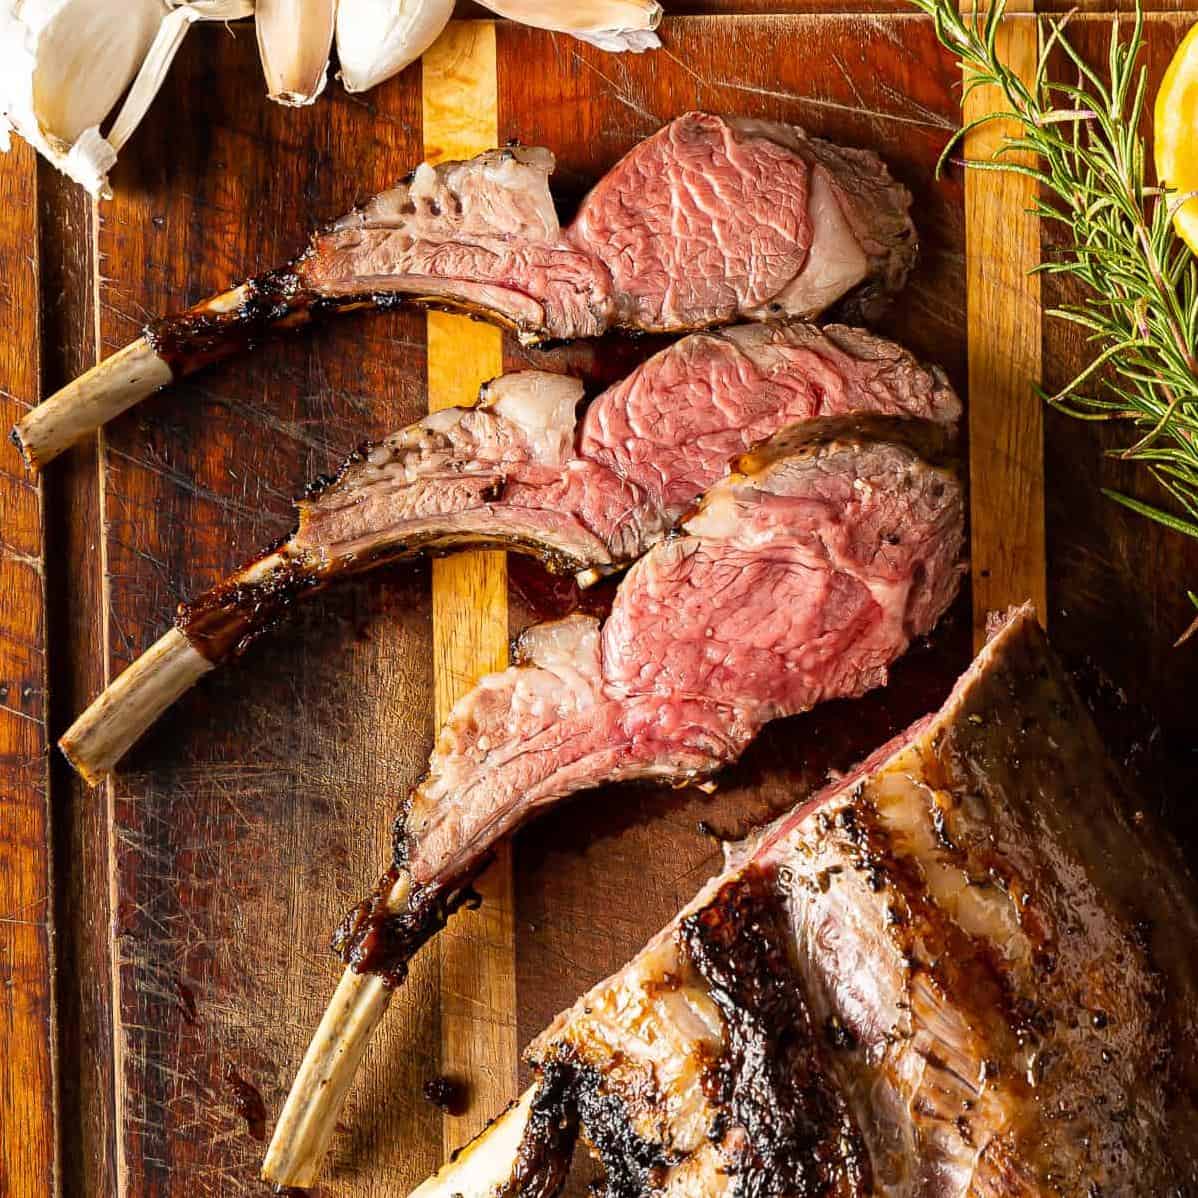  As lamb is a lean meat, grilling it to perfection is a great way to add flavor and texture to it.